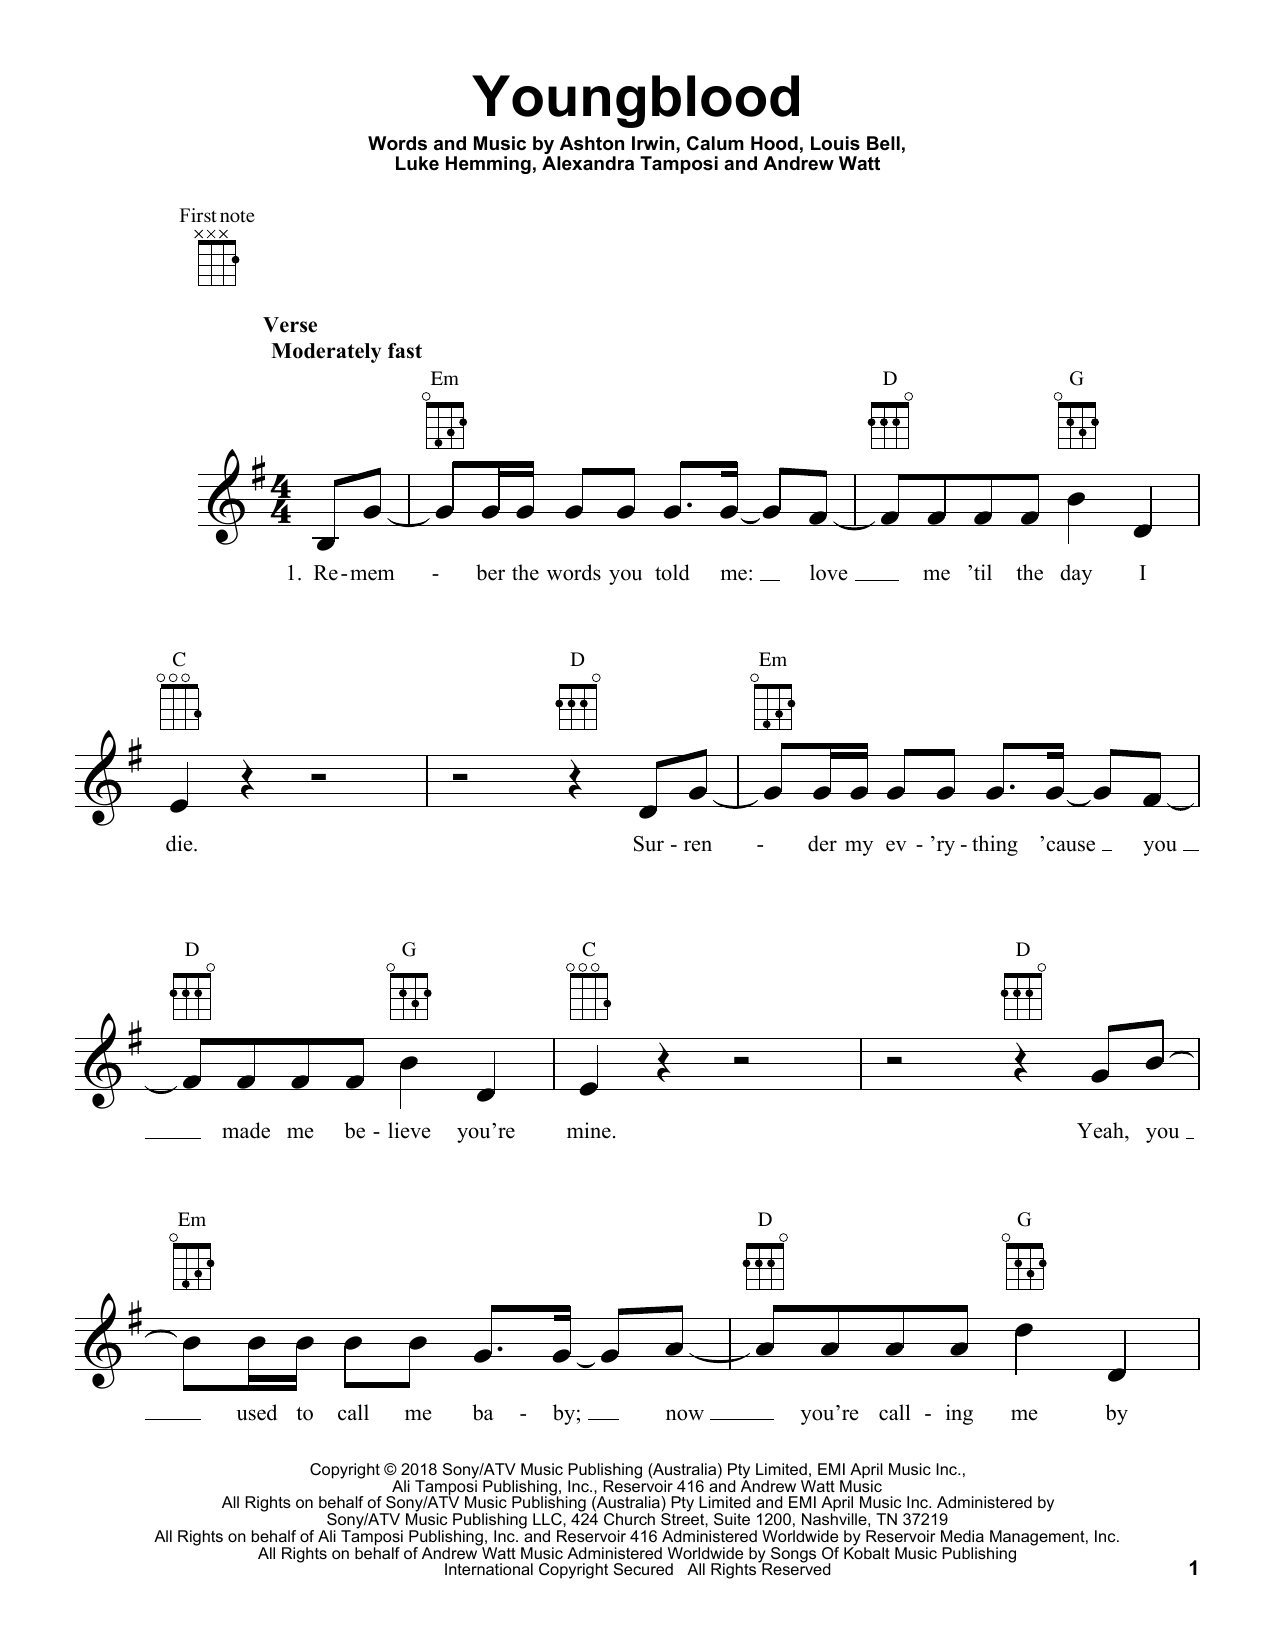 Download 5 Seconds of Summer Youngblood Sheet Music